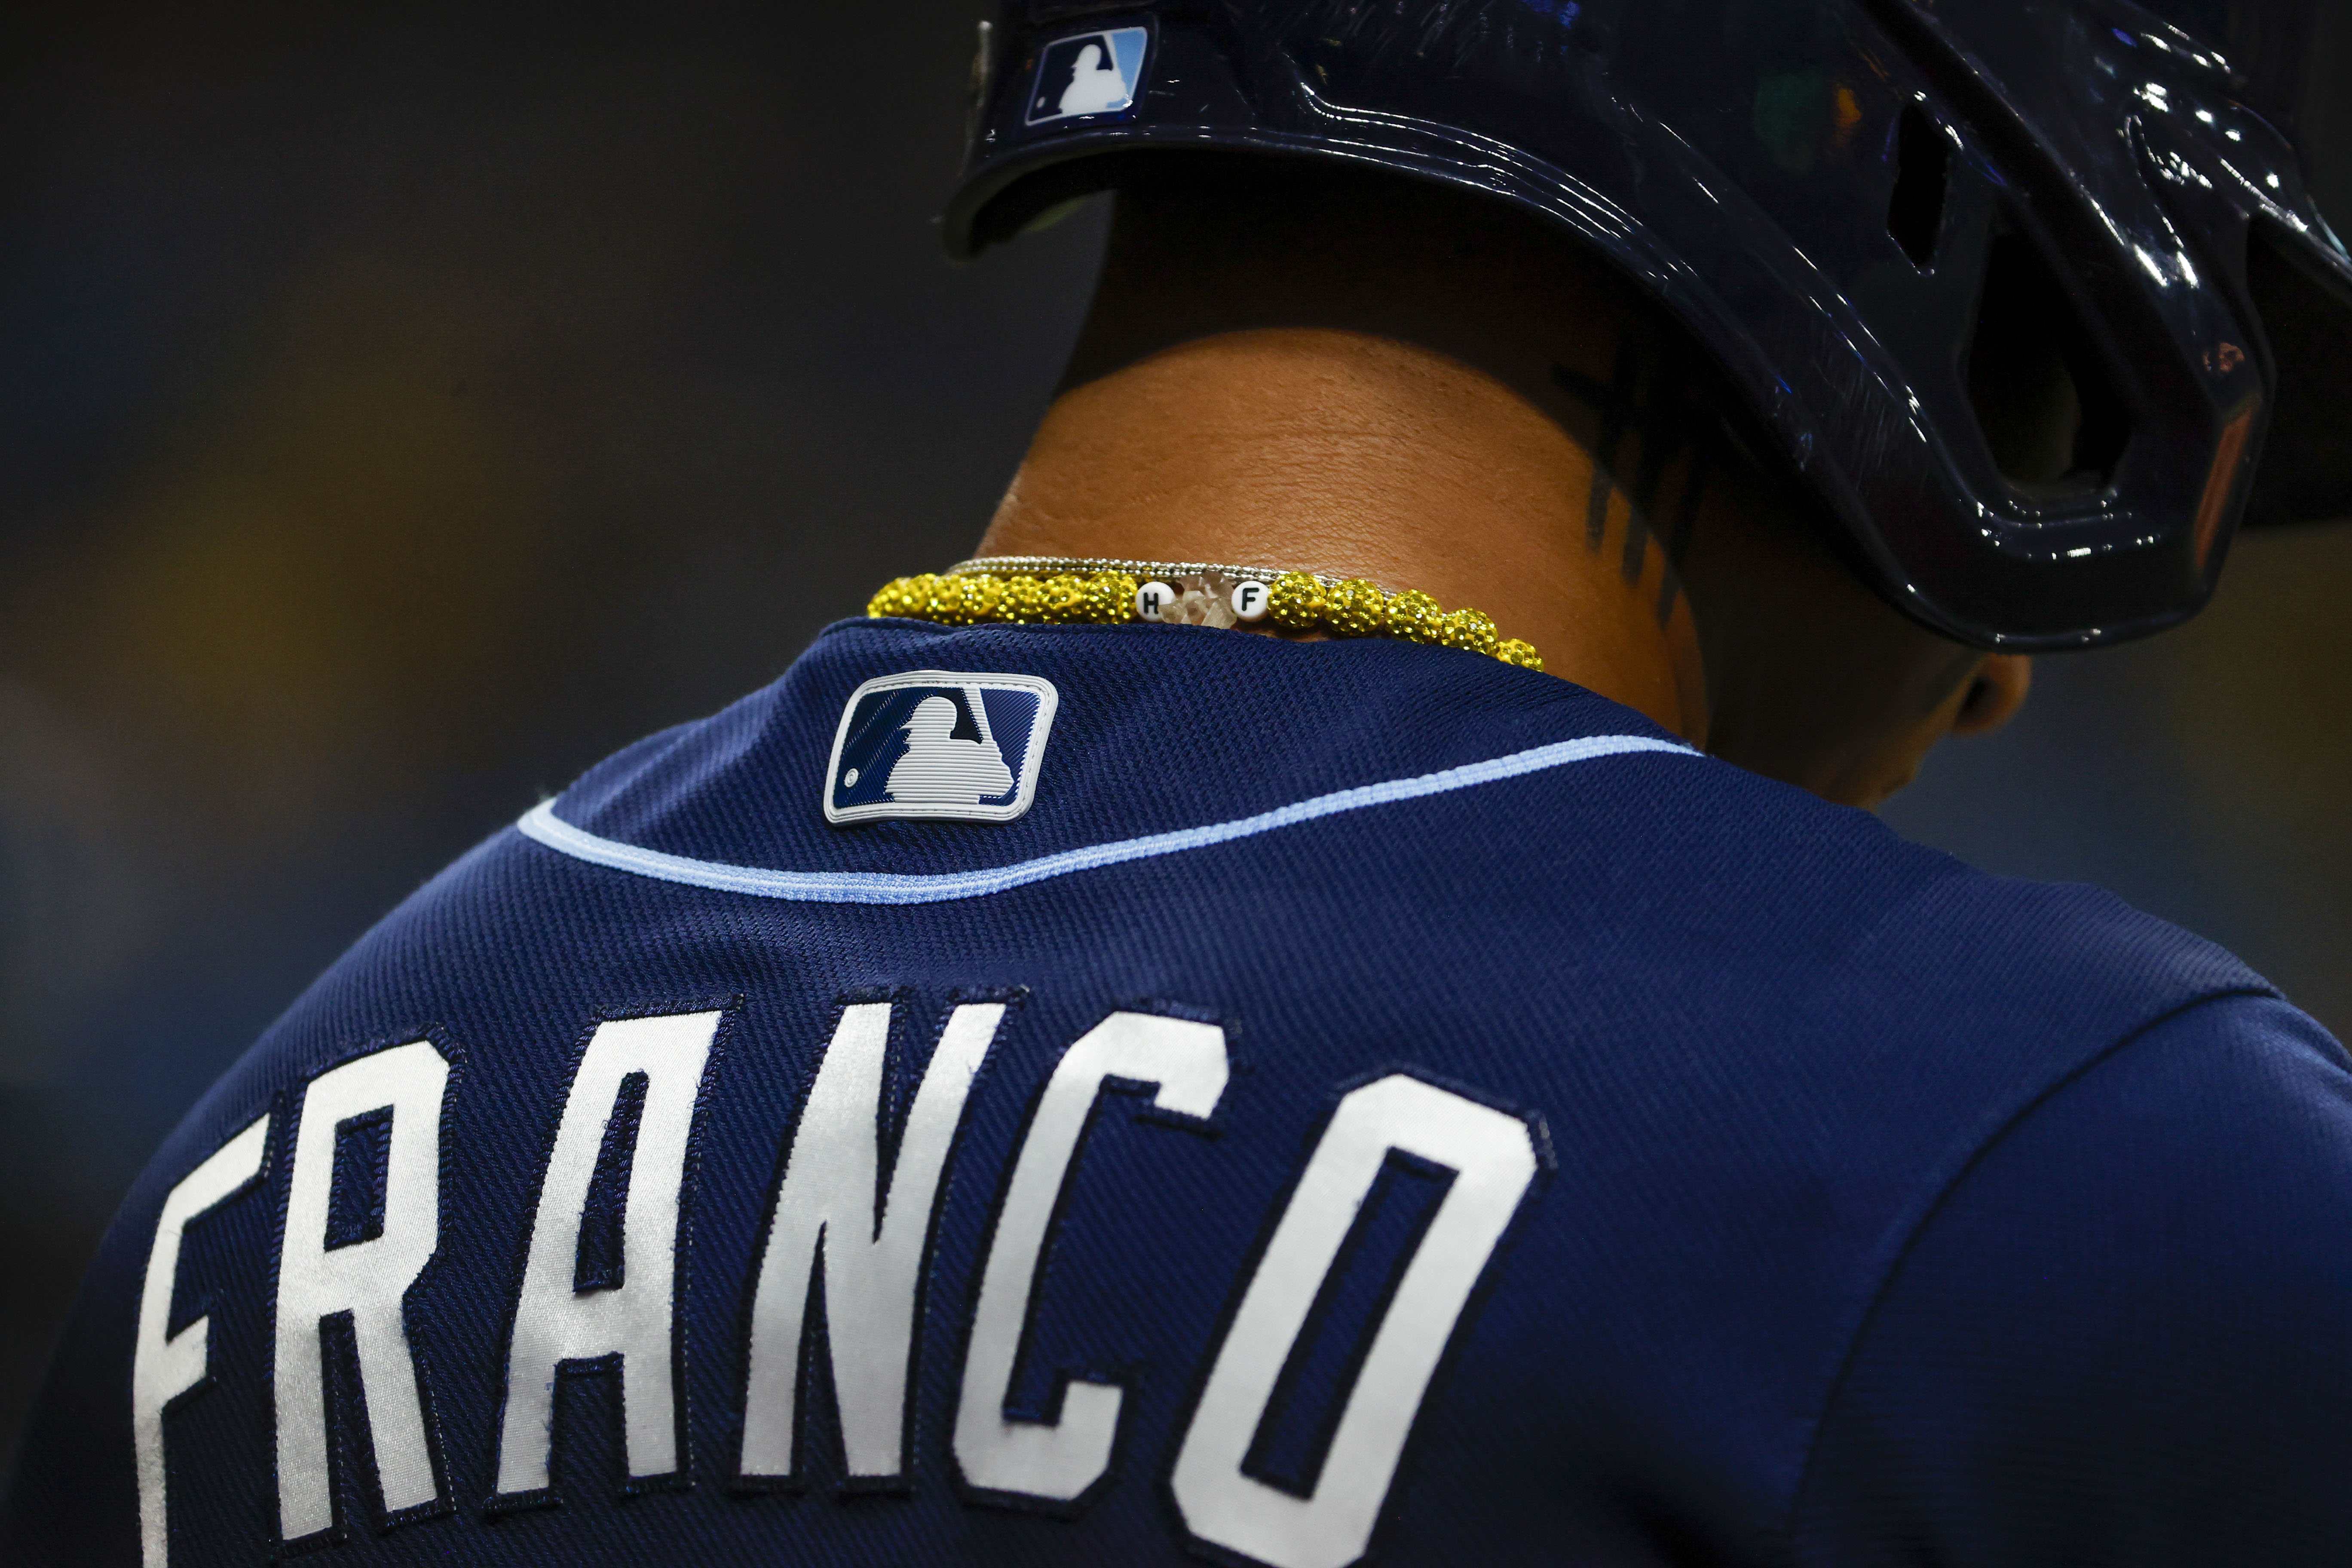 What's next in the case of Rays' Wander Franco?